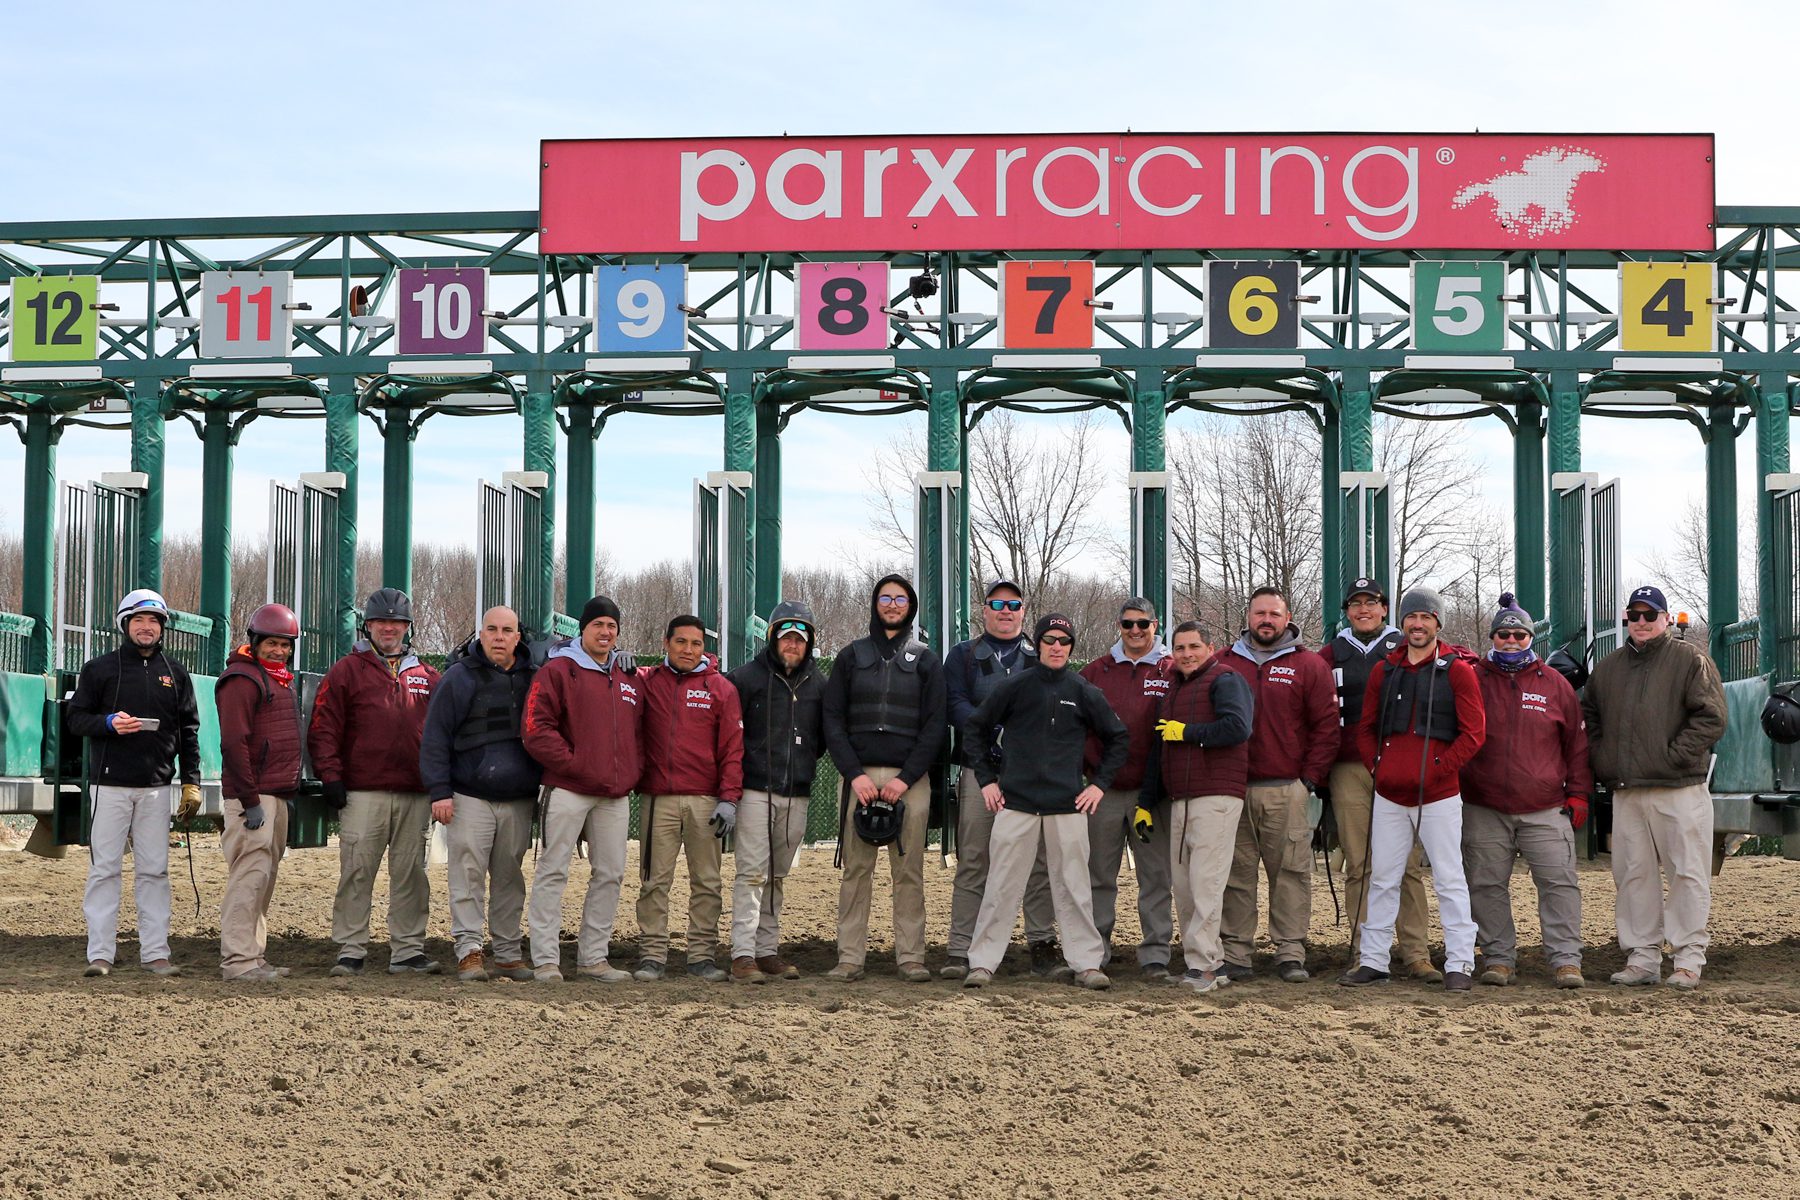 The starting gate crew at Parx on March 8, 2022. Photo By: Chad B. Harmon